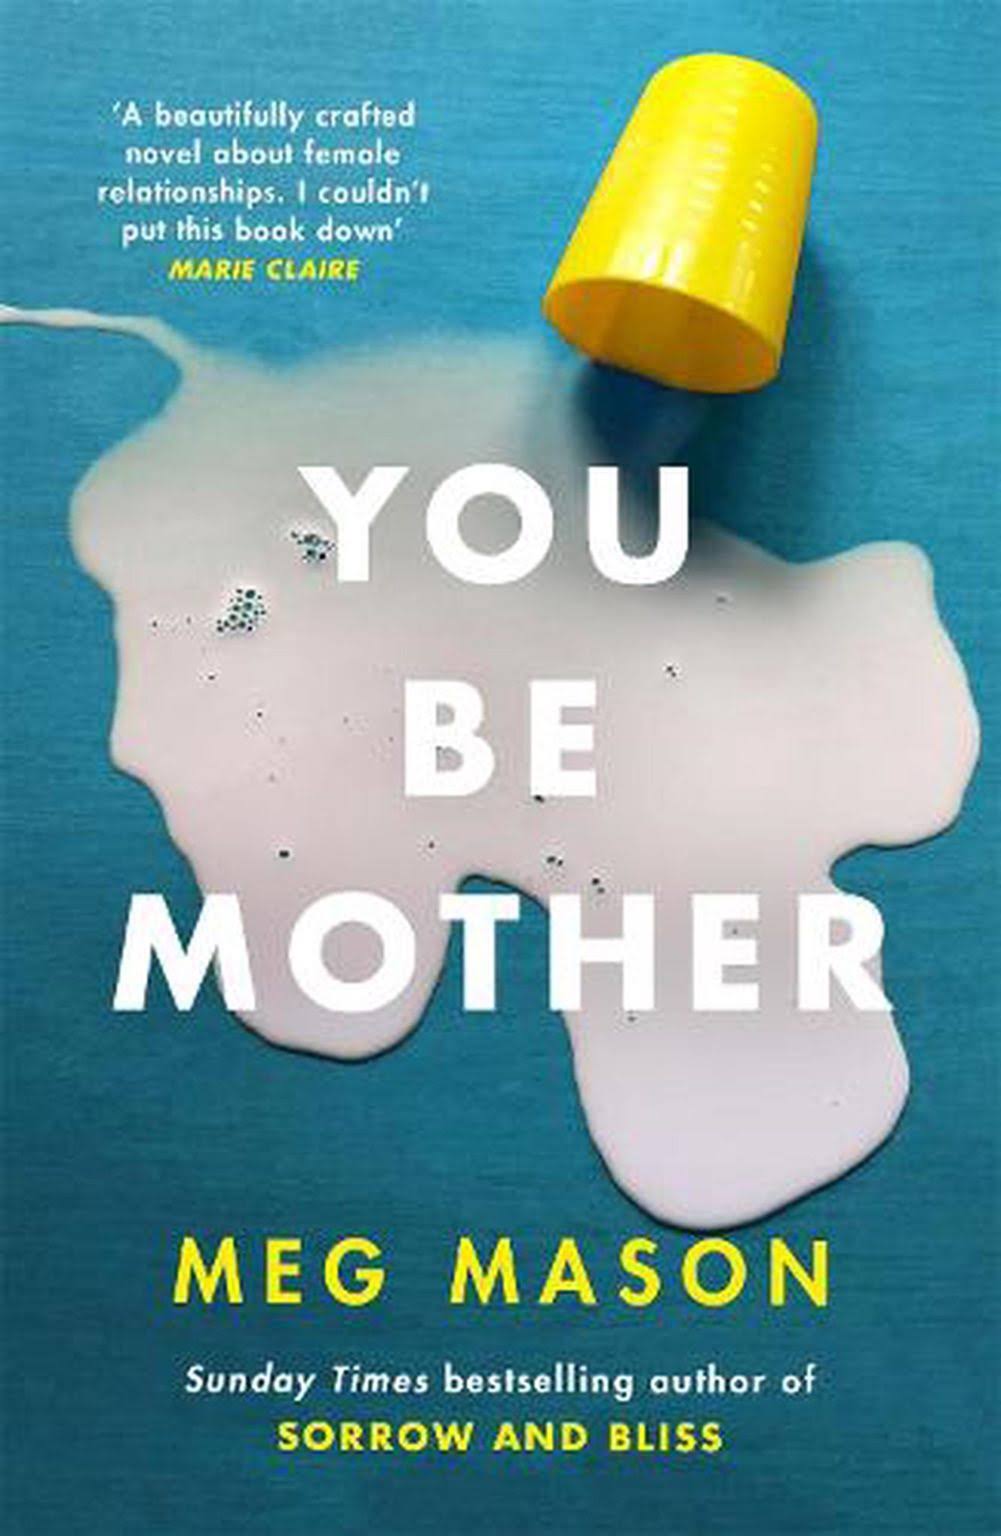 You Be Mother by MEG MASON